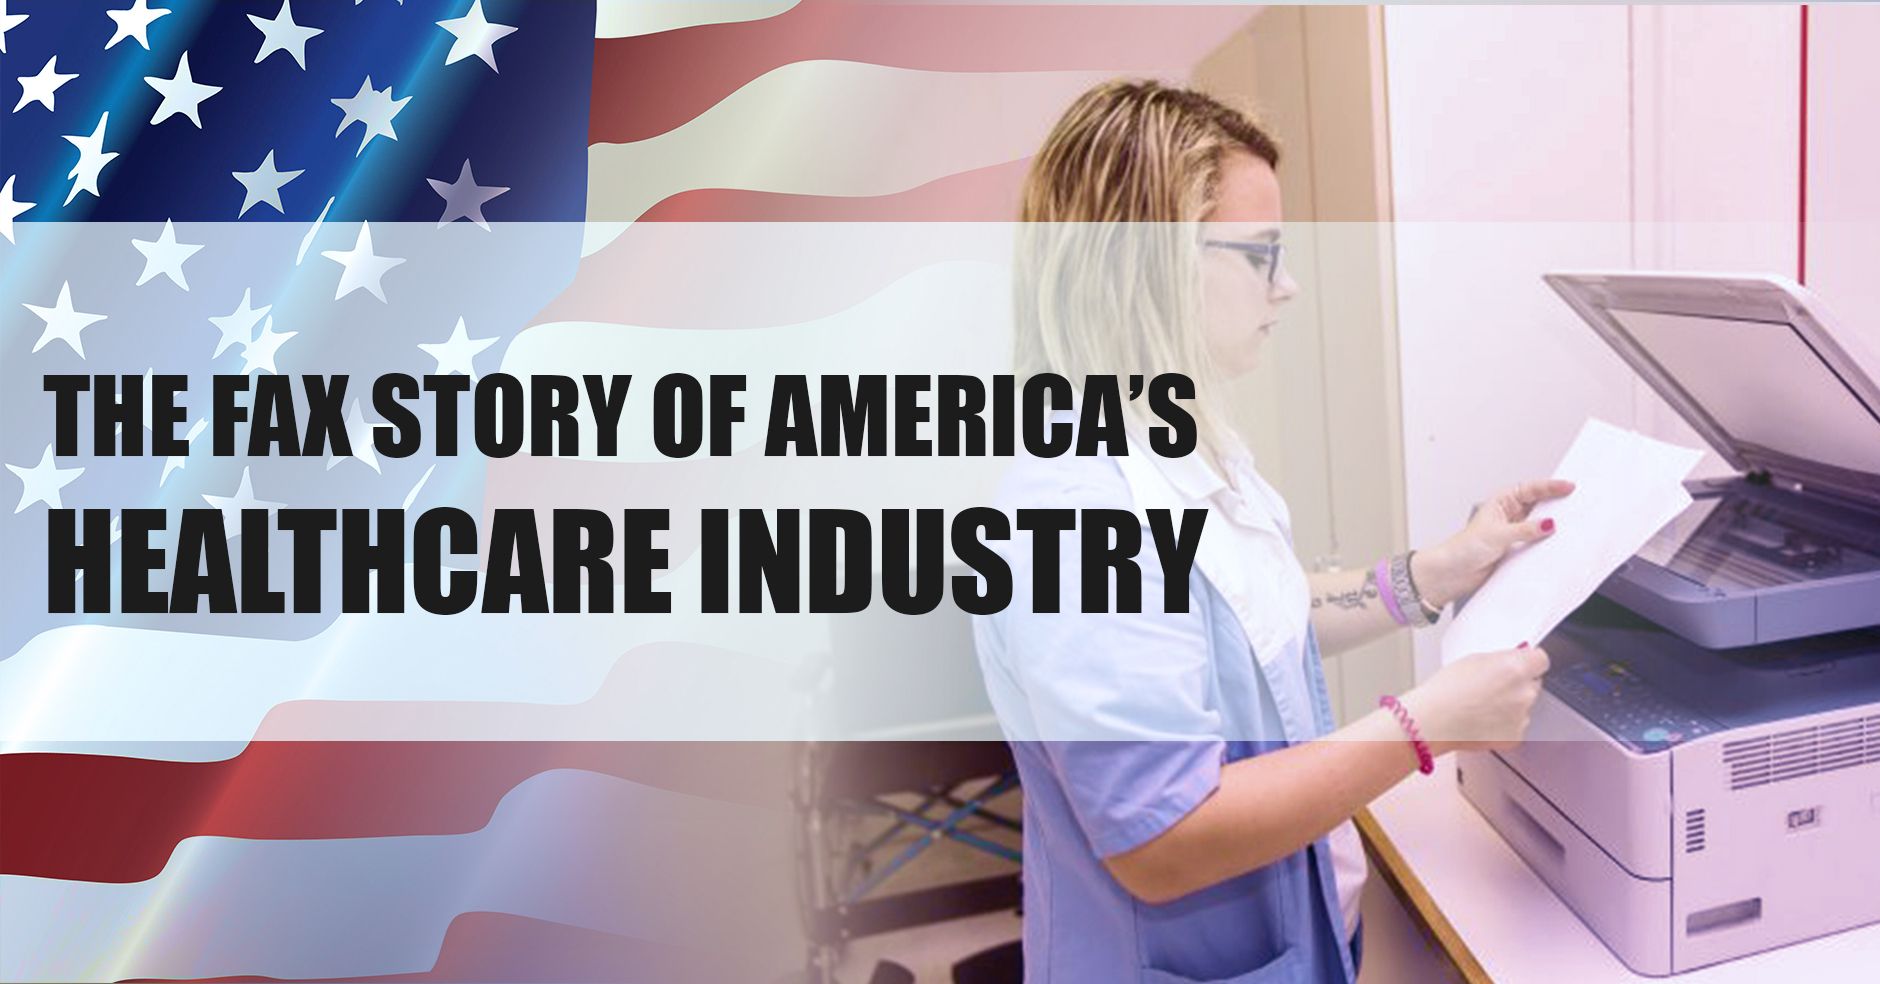 The-Fax-Story-of-America’s-Healthcare-Industry-compressor